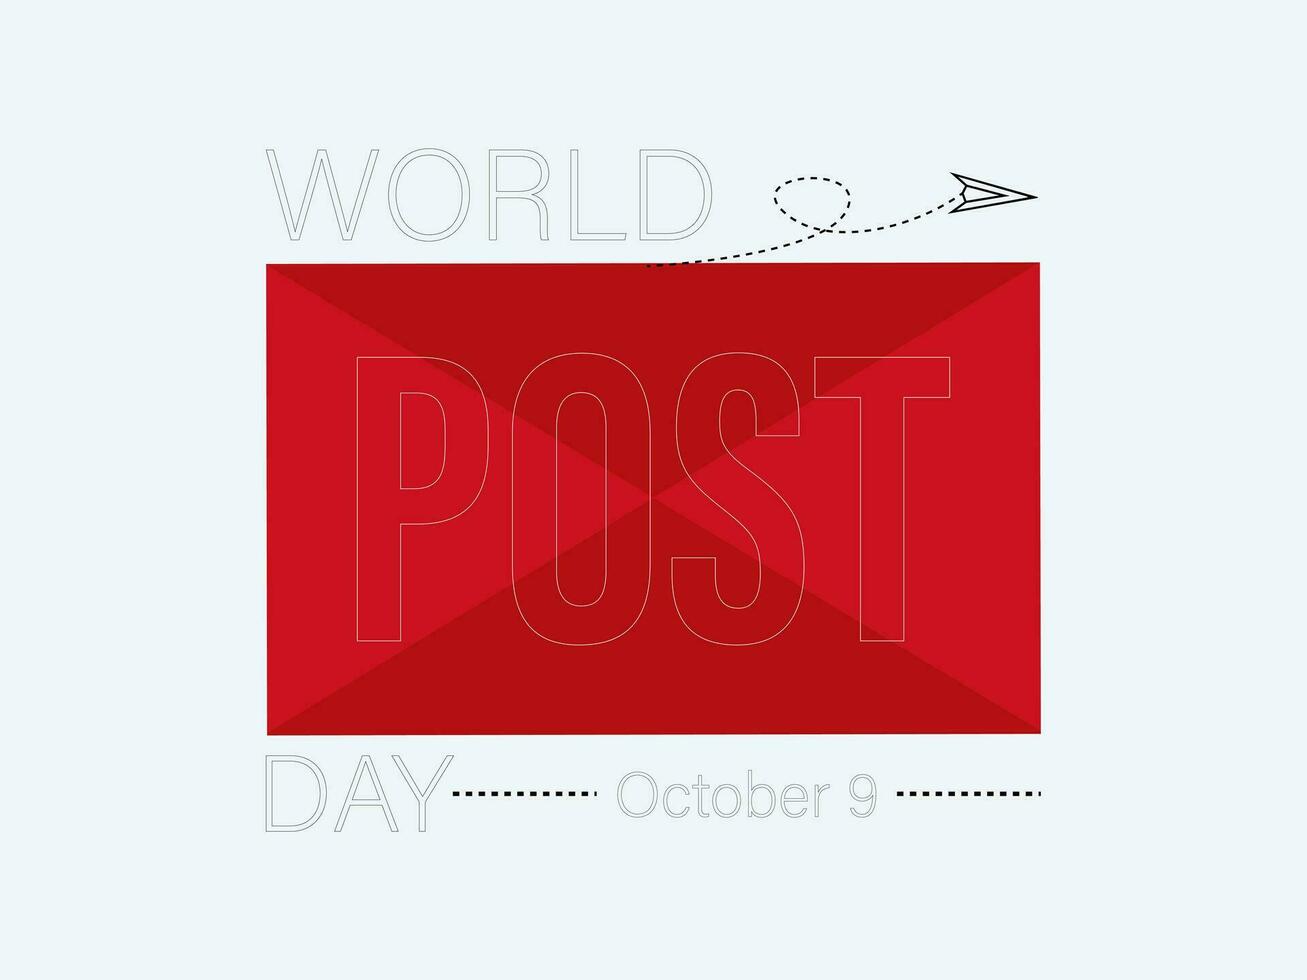 vector graphic of world post day good for world post day celebration. flyer Banner, poster, card, background design.